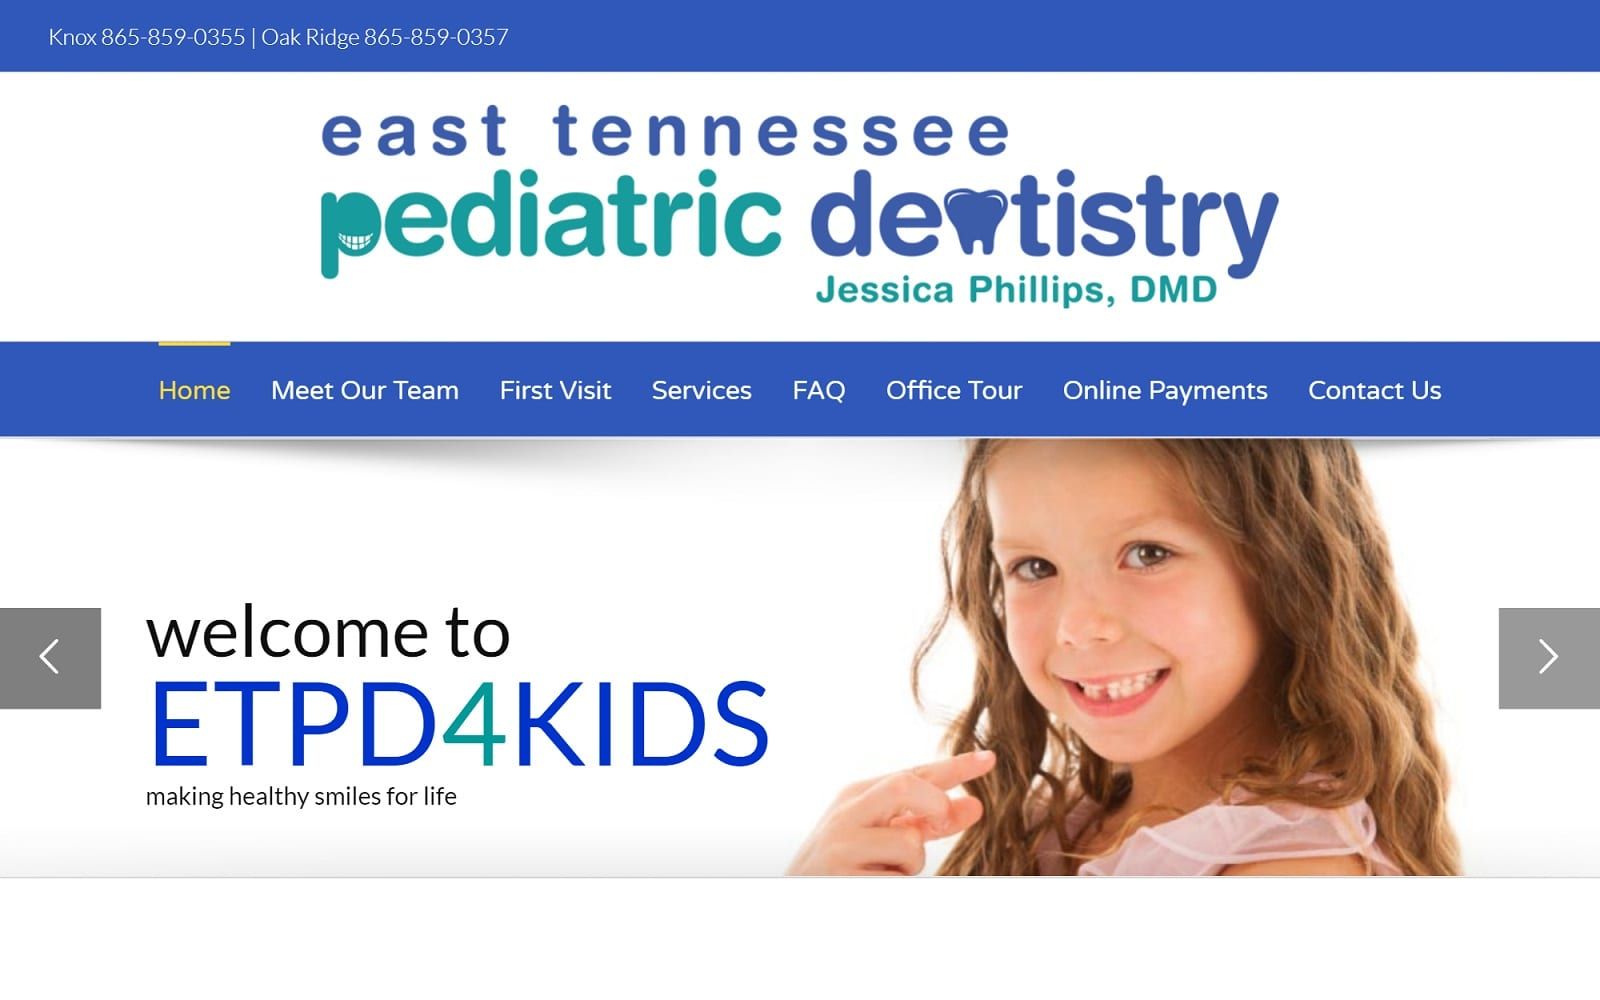 The Screenshot of East Tennessee Pediatric Dentistry etpd4kids.com Dr. Jessica Phillips Website